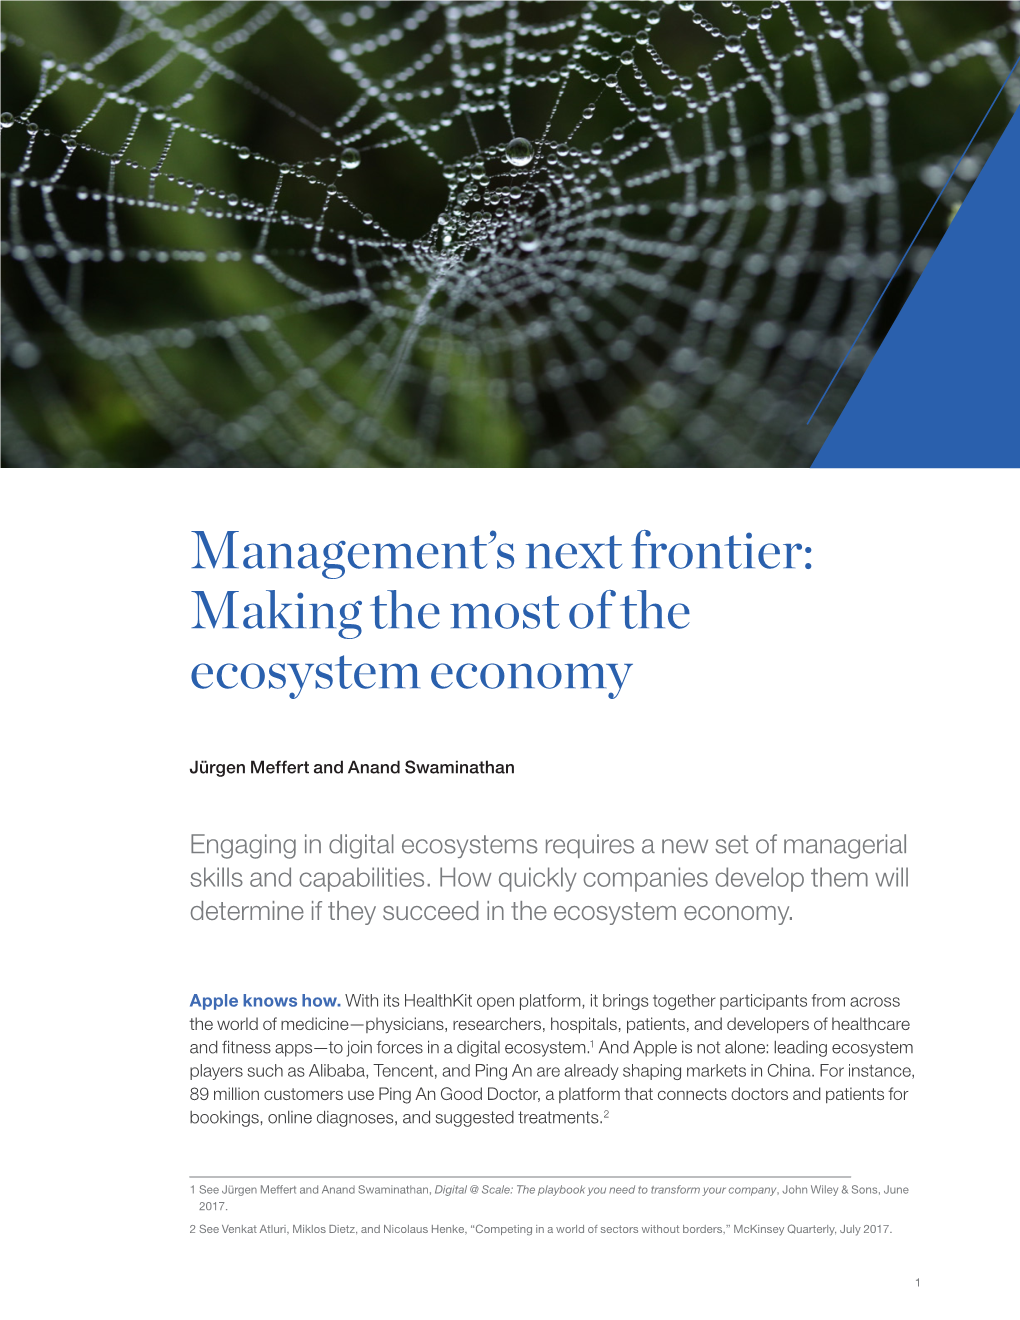 Management's Next Frontier: Making the Most of the Ecosystem Economy